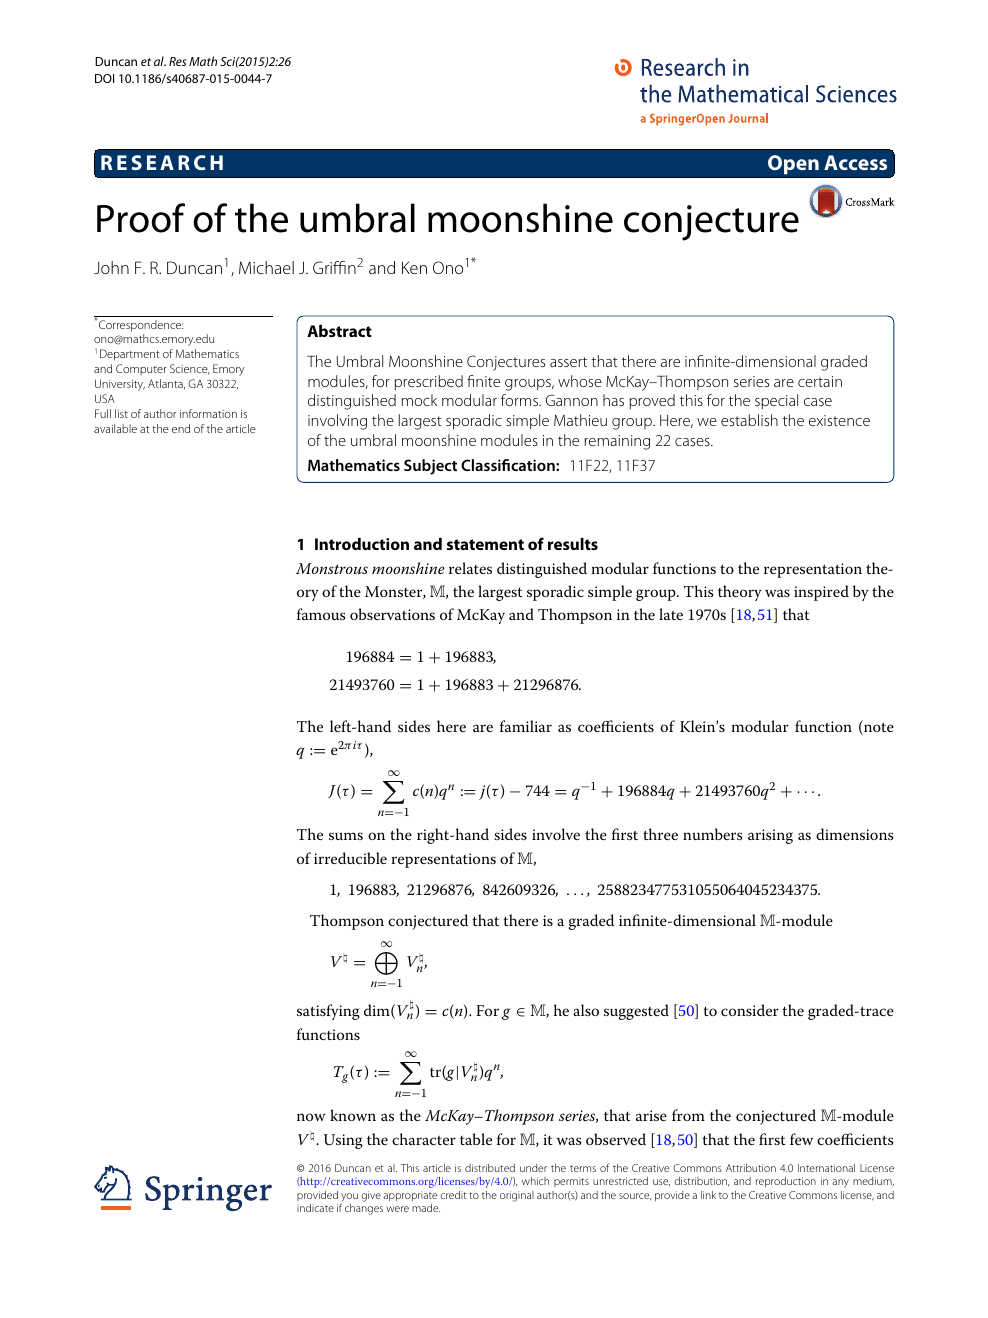 Proof Of The Umbral Moonshine Conjecture Topic Of Research Paper In Mathematics Download Scholarly Article Pdf And Read For Free On Cyberleninka Open Science Hub